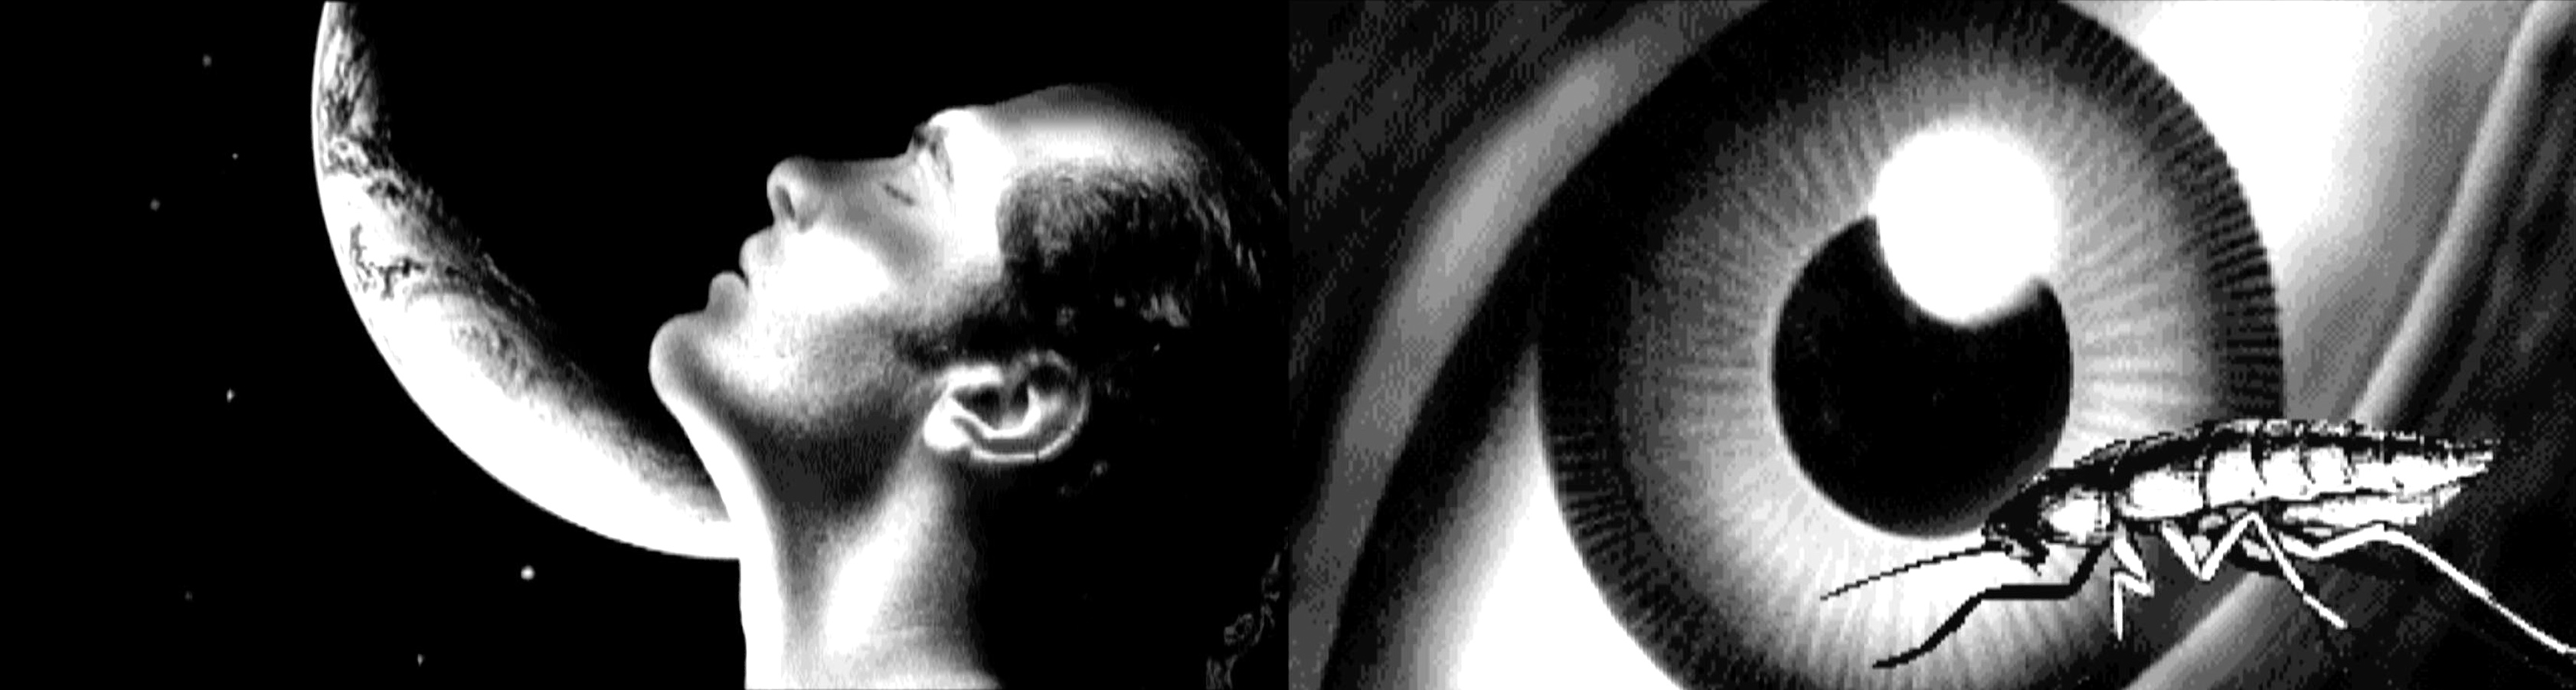 Two black and white screenshots of the demo Hardwired by
                Crionics and the Silents. The first images shows a close-up of a
                screaming man's head silhouetted against the moon. An extreme
                close-up of an eye with a cockroach in front of it.